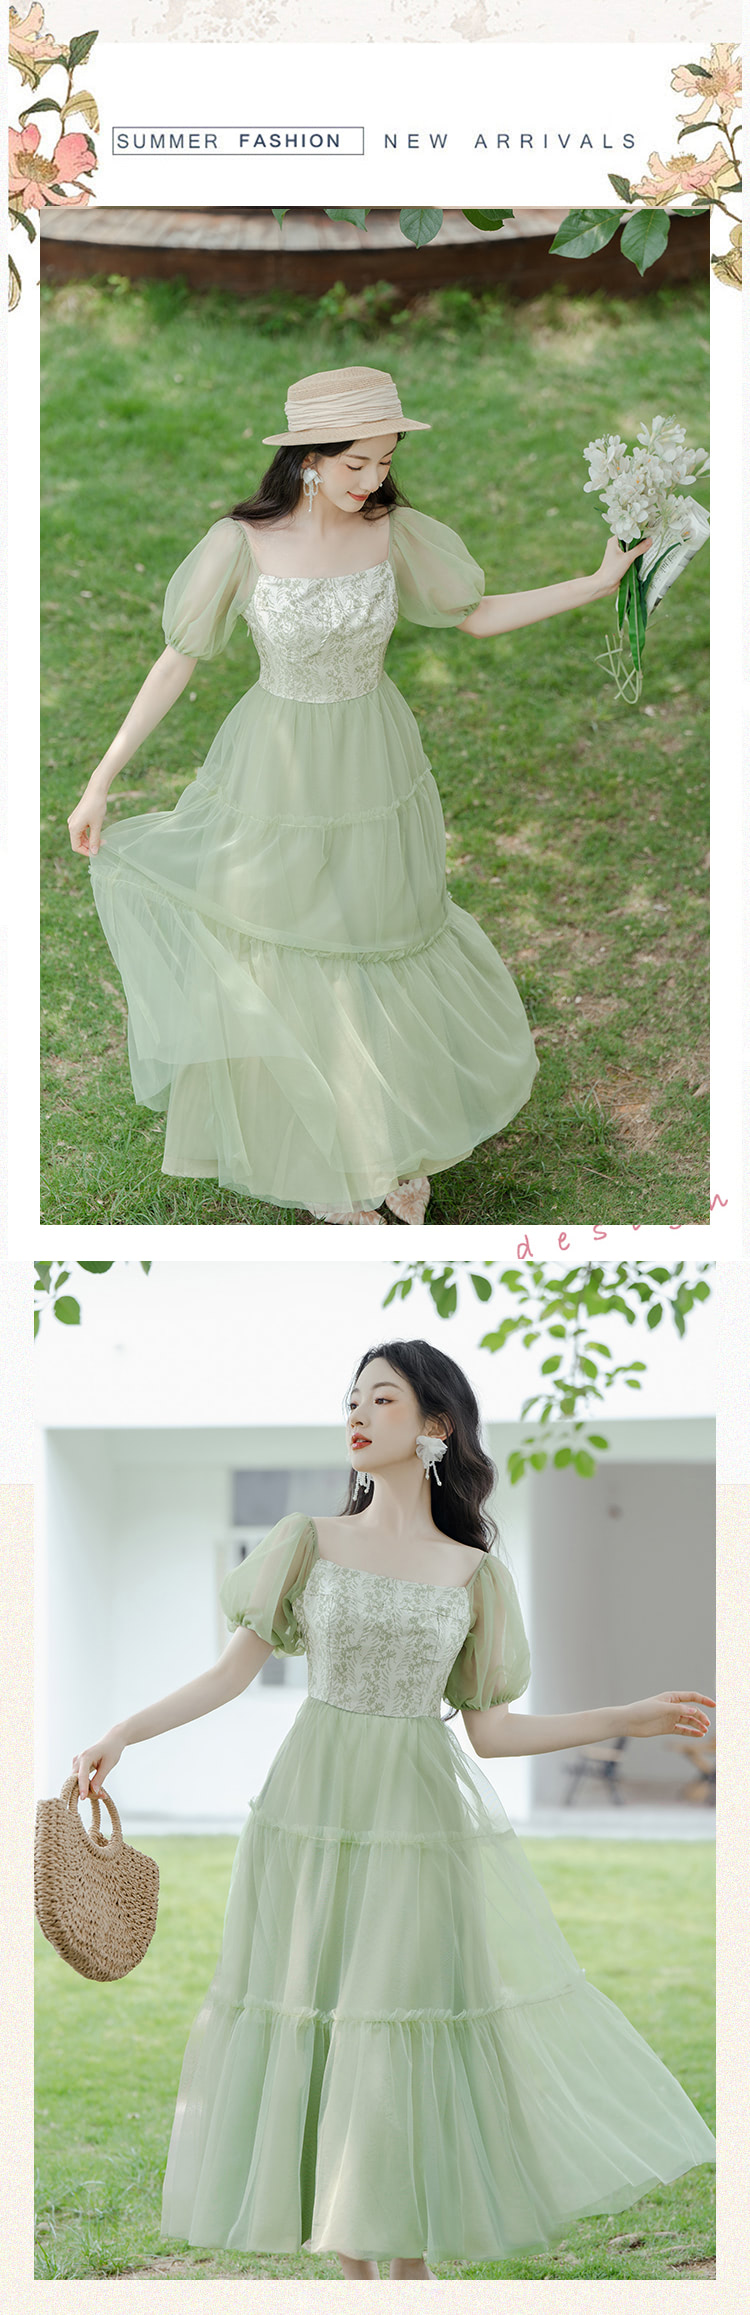 Sweet-French-Style-Green-Jacquard-Tulle-Floral-Summer-Casual-Dress14